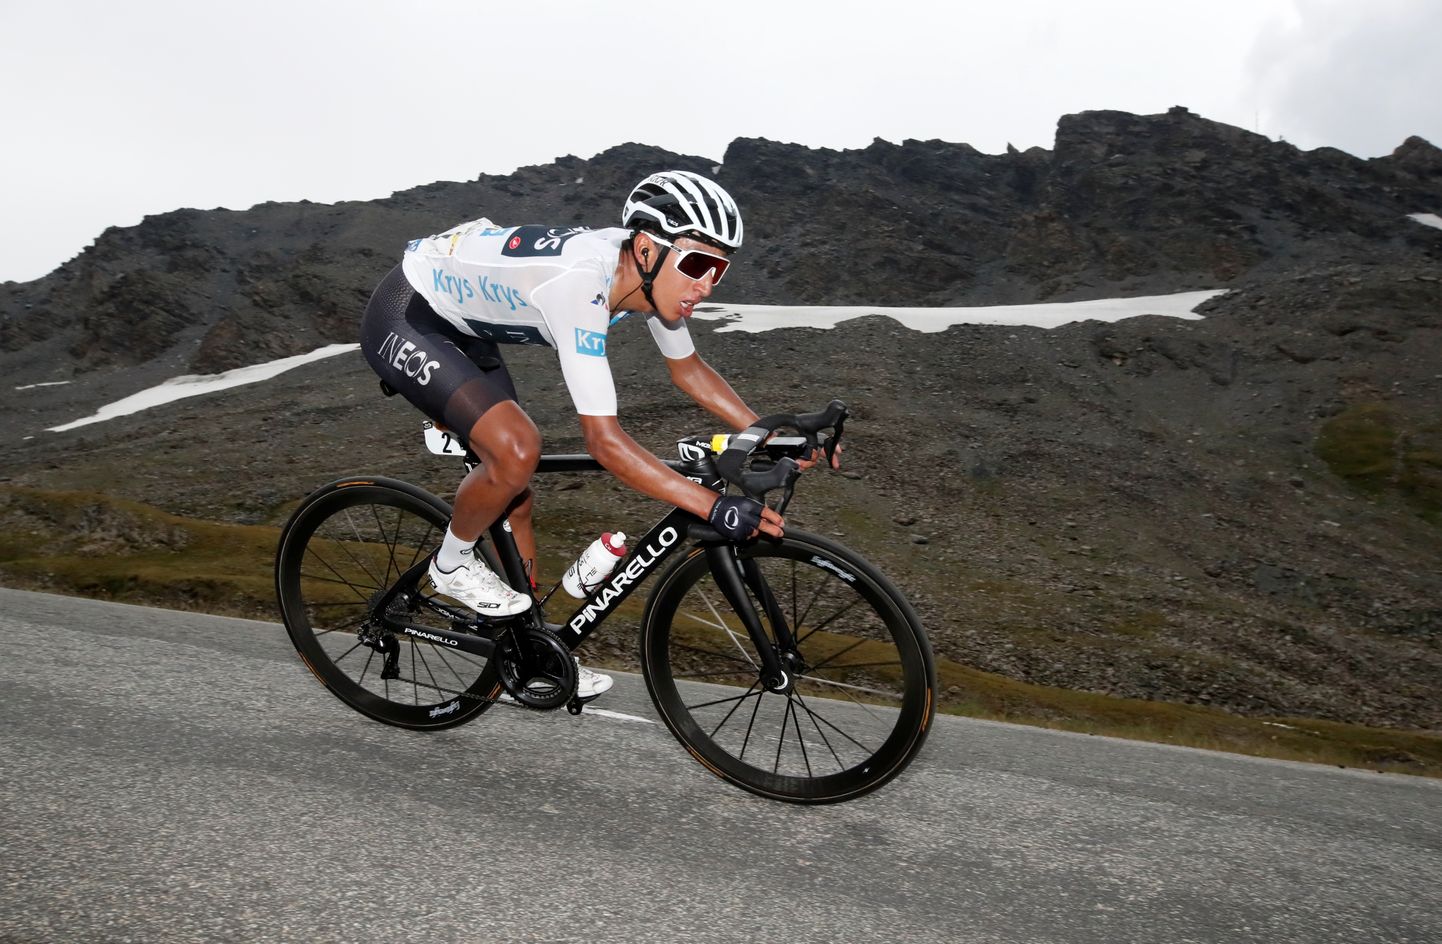 Cycling - Tour de France - The 126.5-km Stage 19 from Saint-Jean-de-Maurienne to Tignes - July 26, 2019 - Team INEOS rider Egan Bernal of Colombia, wearing the white jersey for best young rider,  in action on the descent of the Col de l'Iseran. REUTERS/Christian Hartmann